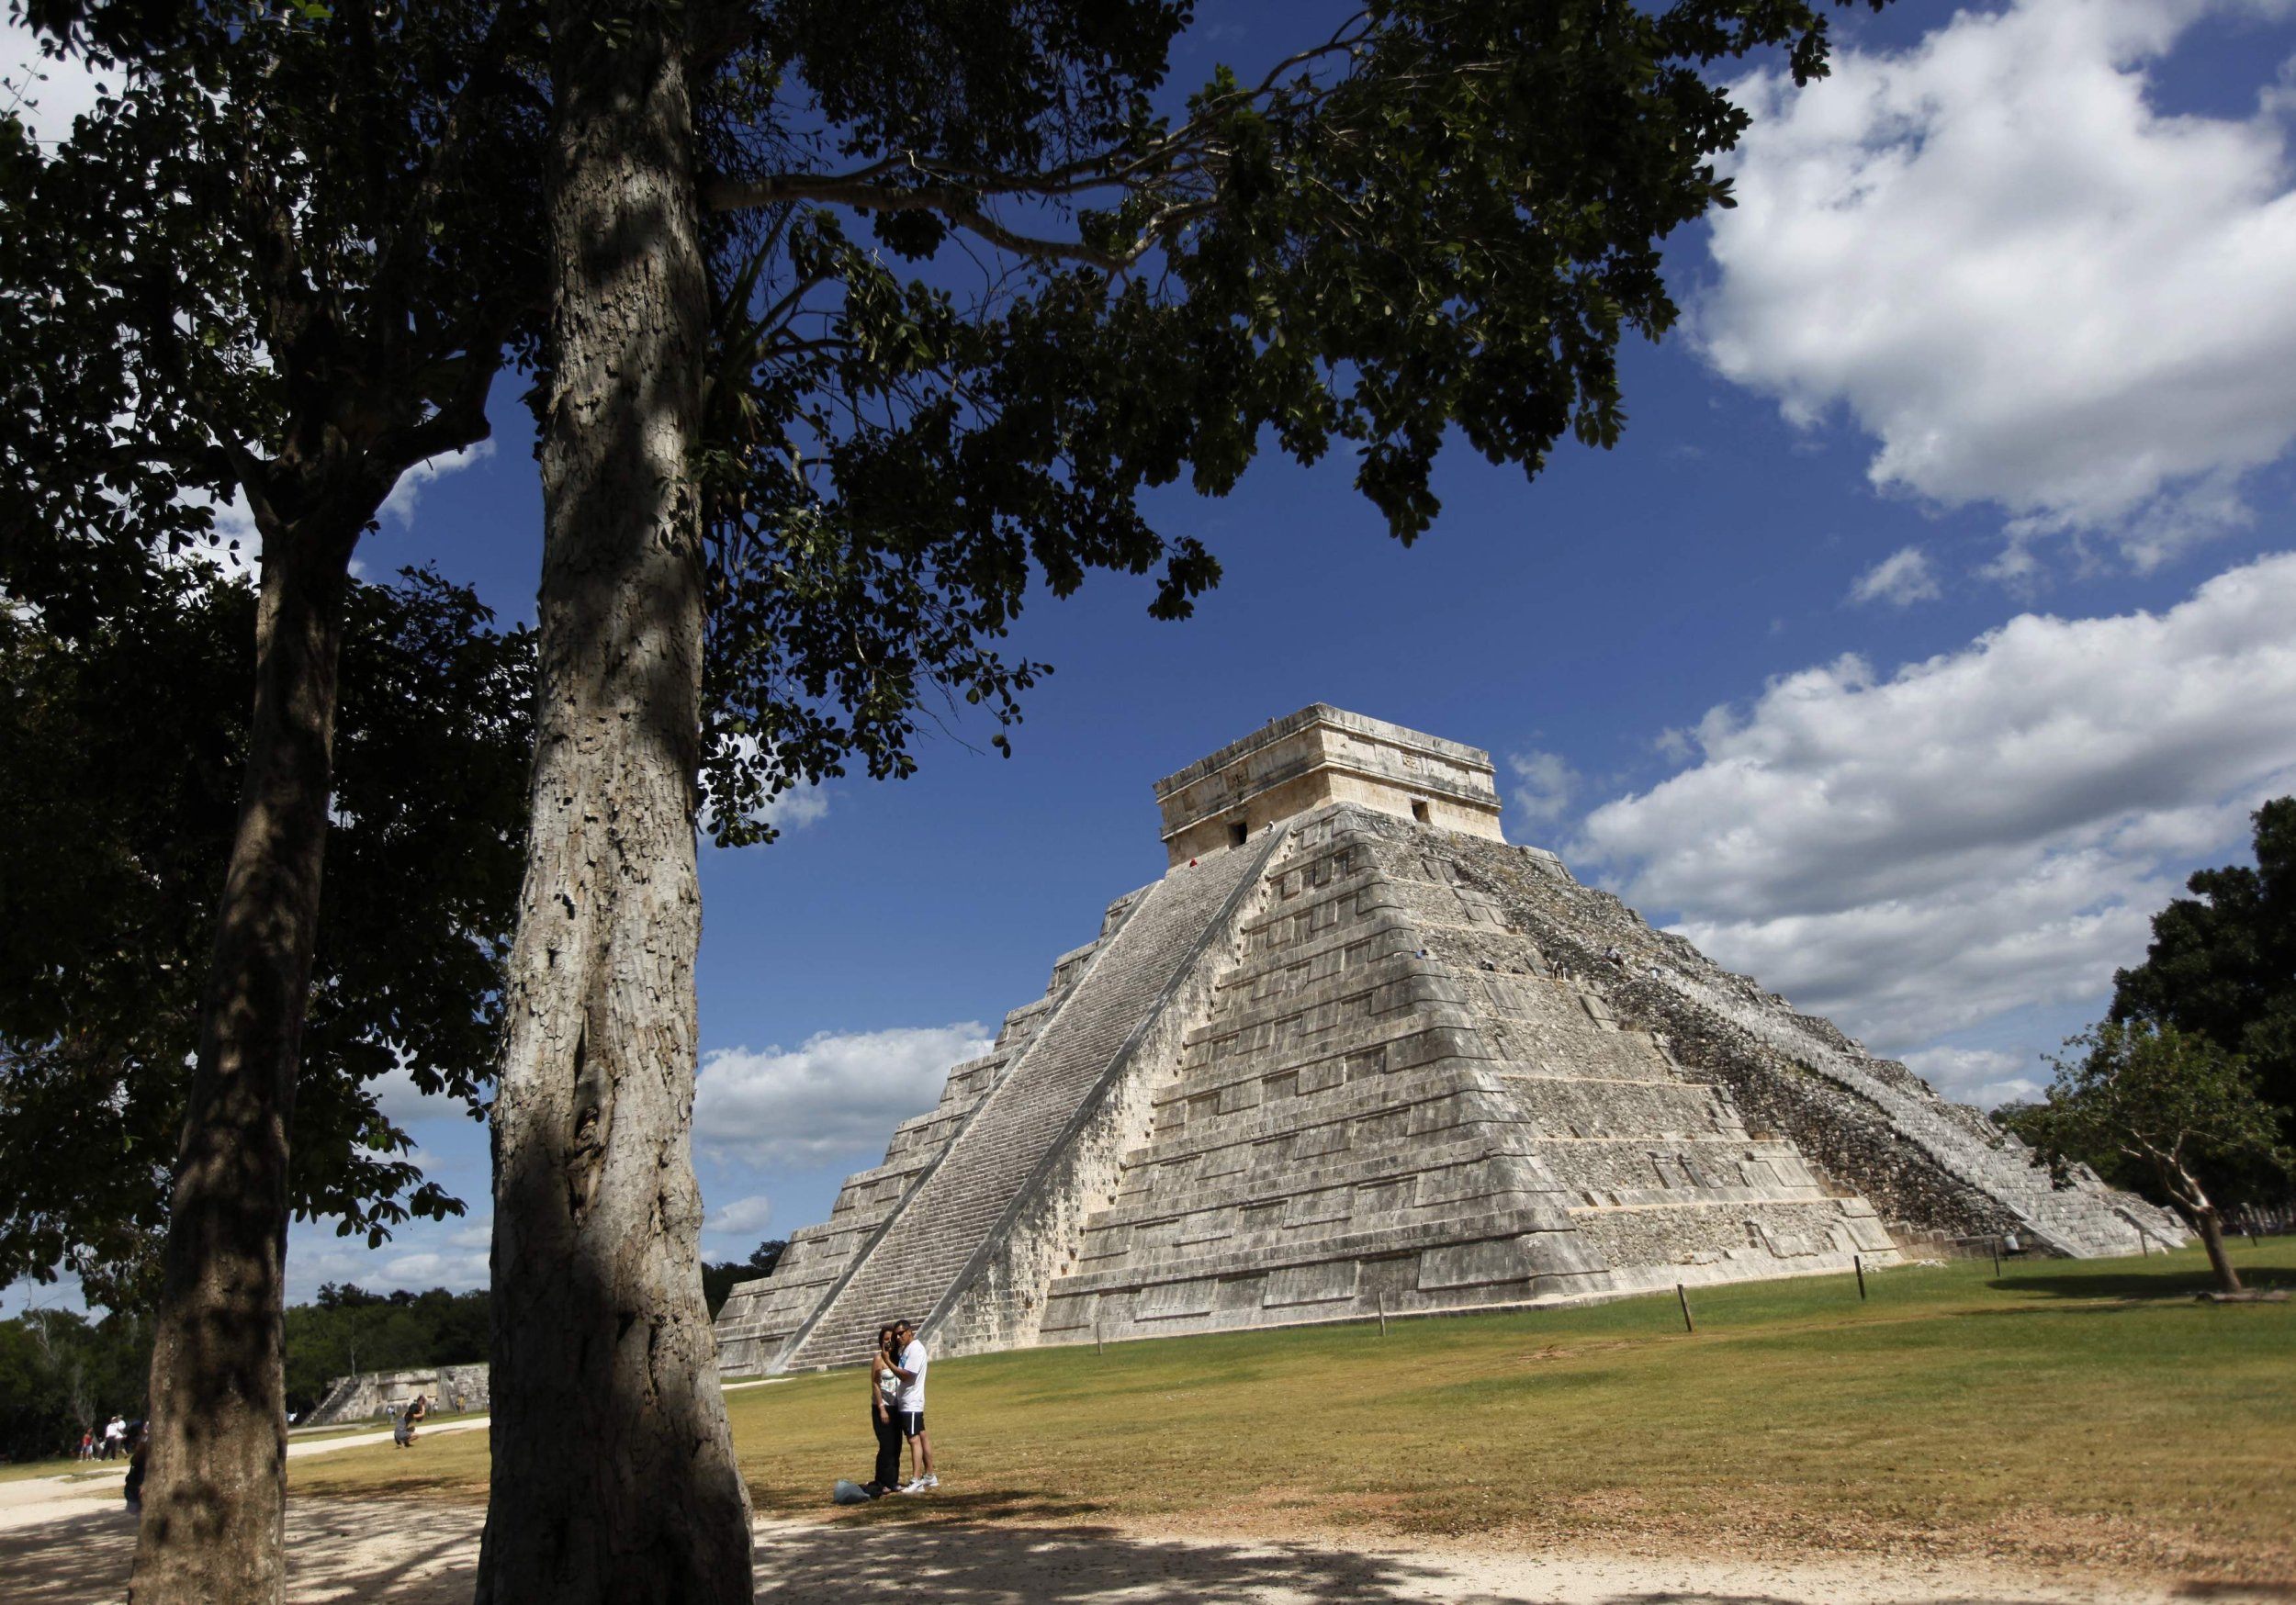 Central America, not a region known as a tourist haven, saw visitor growth increase at at 7 percent clip.